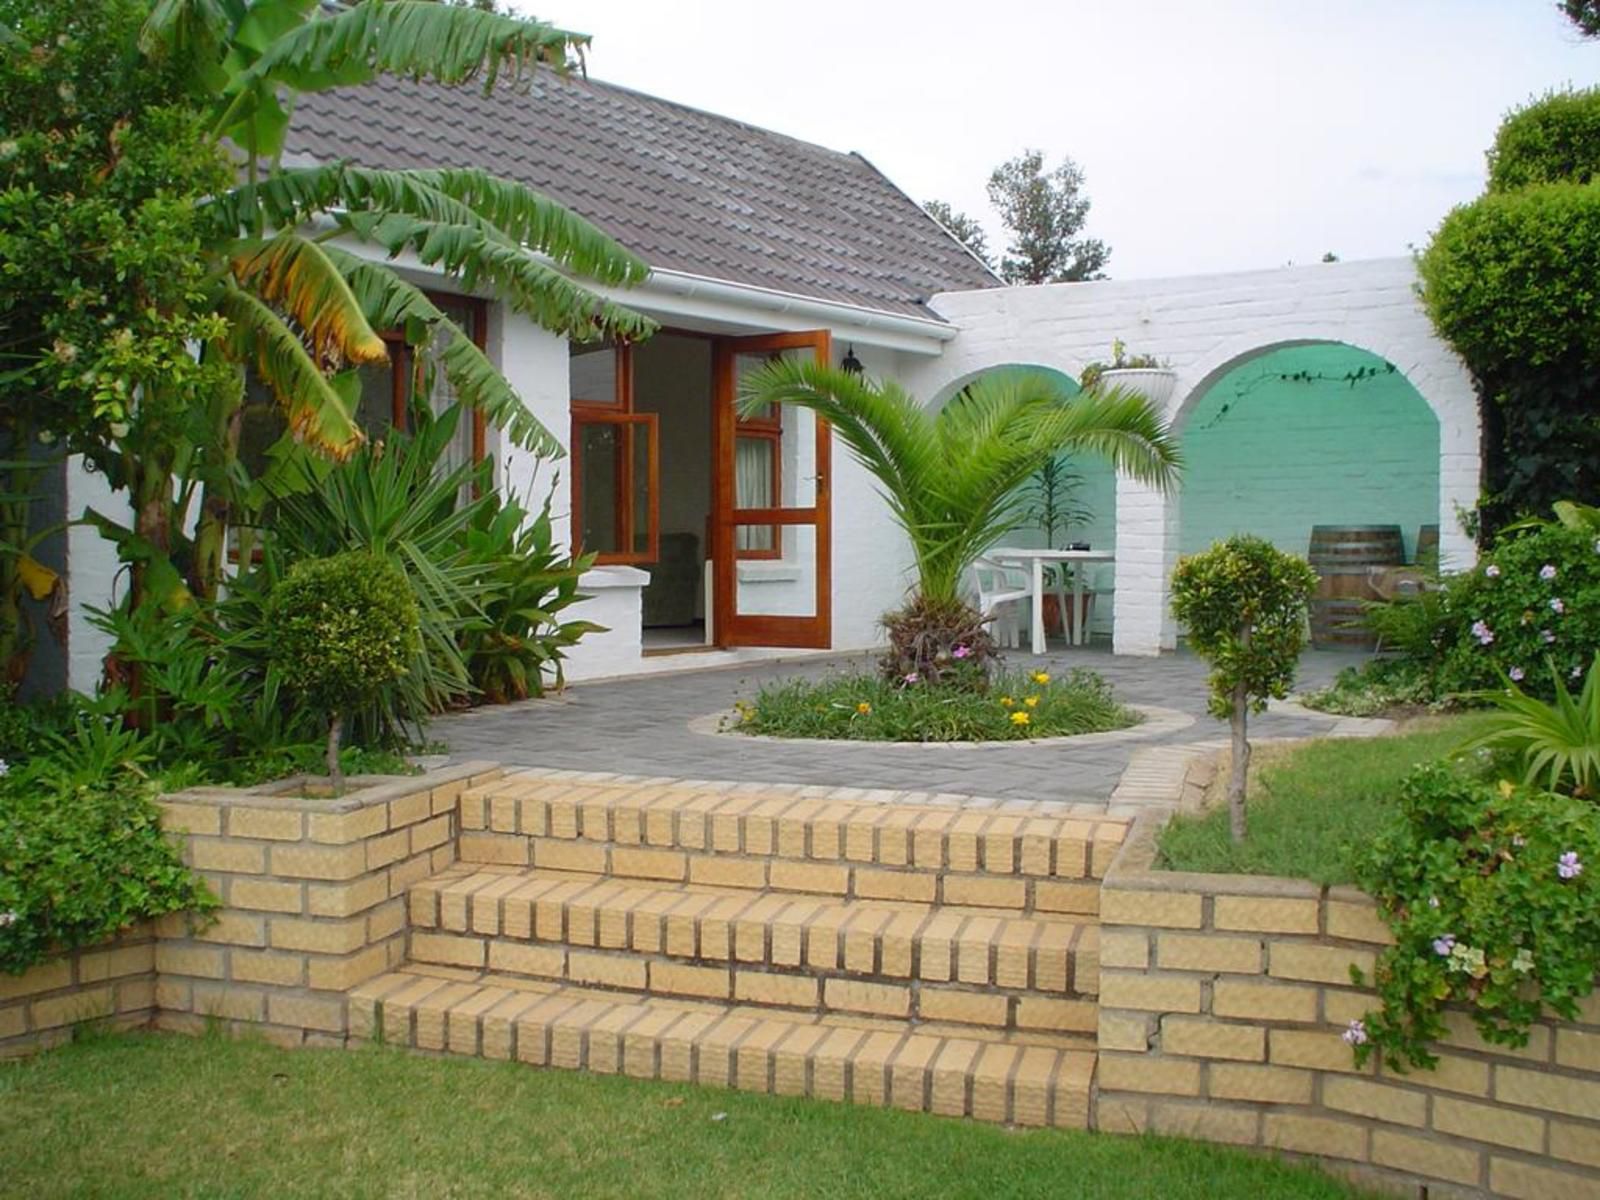 Aberdour Guesthouse Humewood Port Elizabeth Eastern Cape South Africa House, Building, Architecture